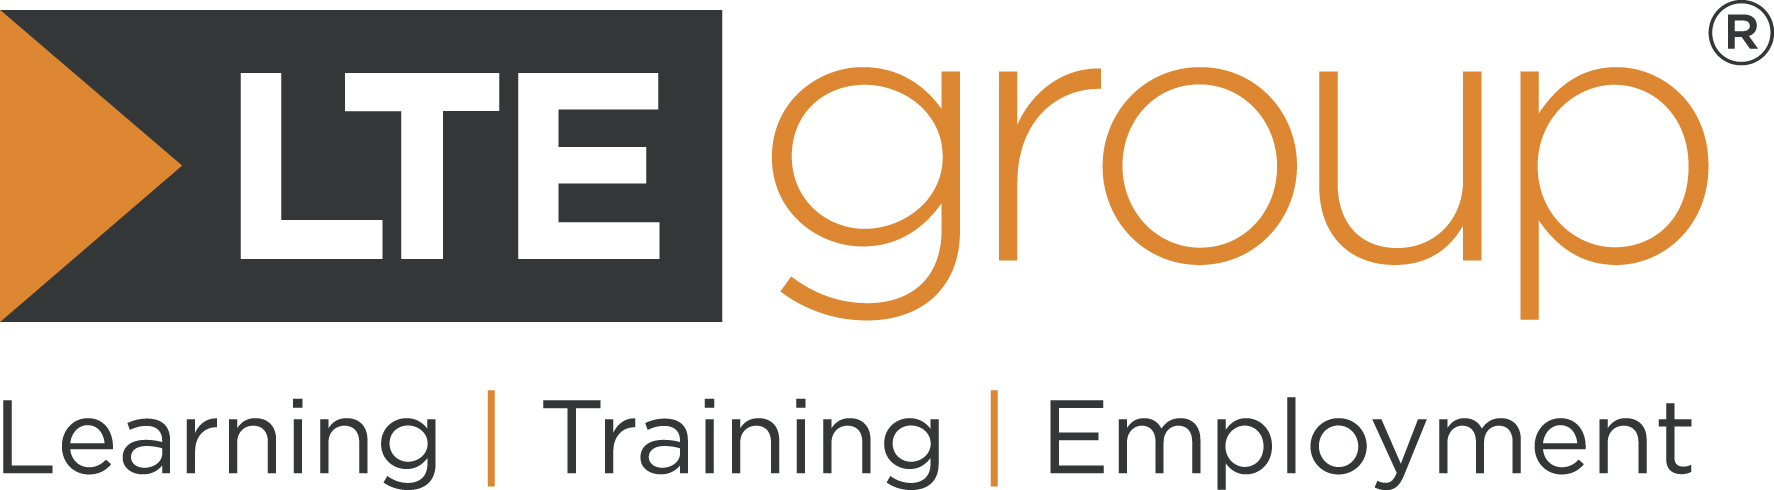 LTE Group: Learning, Training & Employment